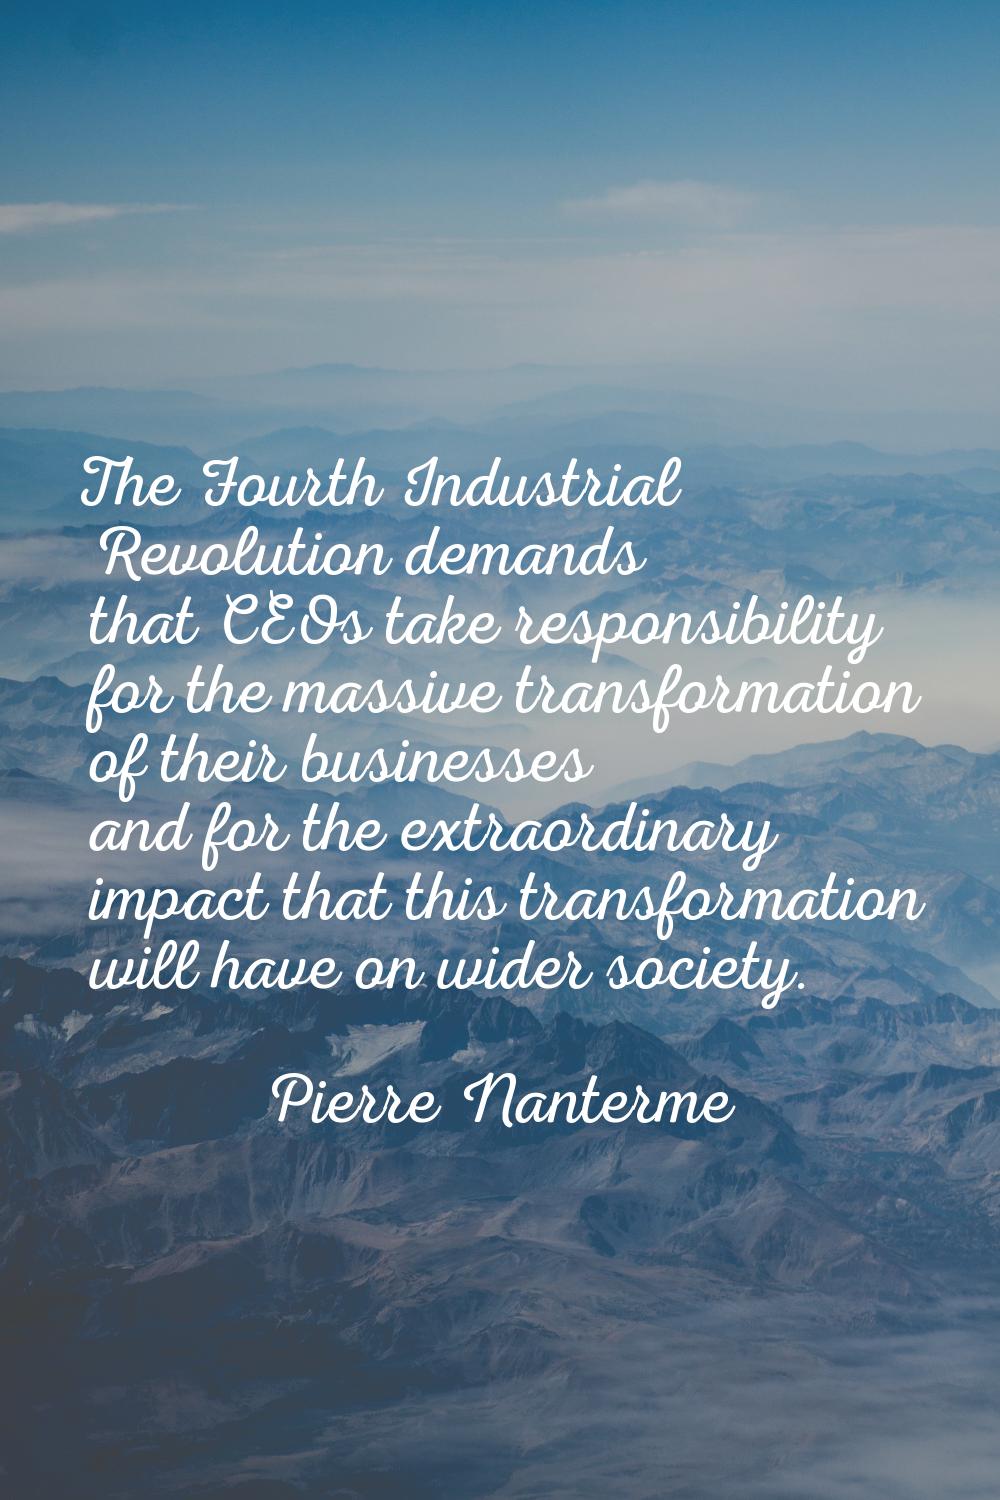 The Fourth Industrial Revolution demands that CEOs take responsibility for the massive transformati